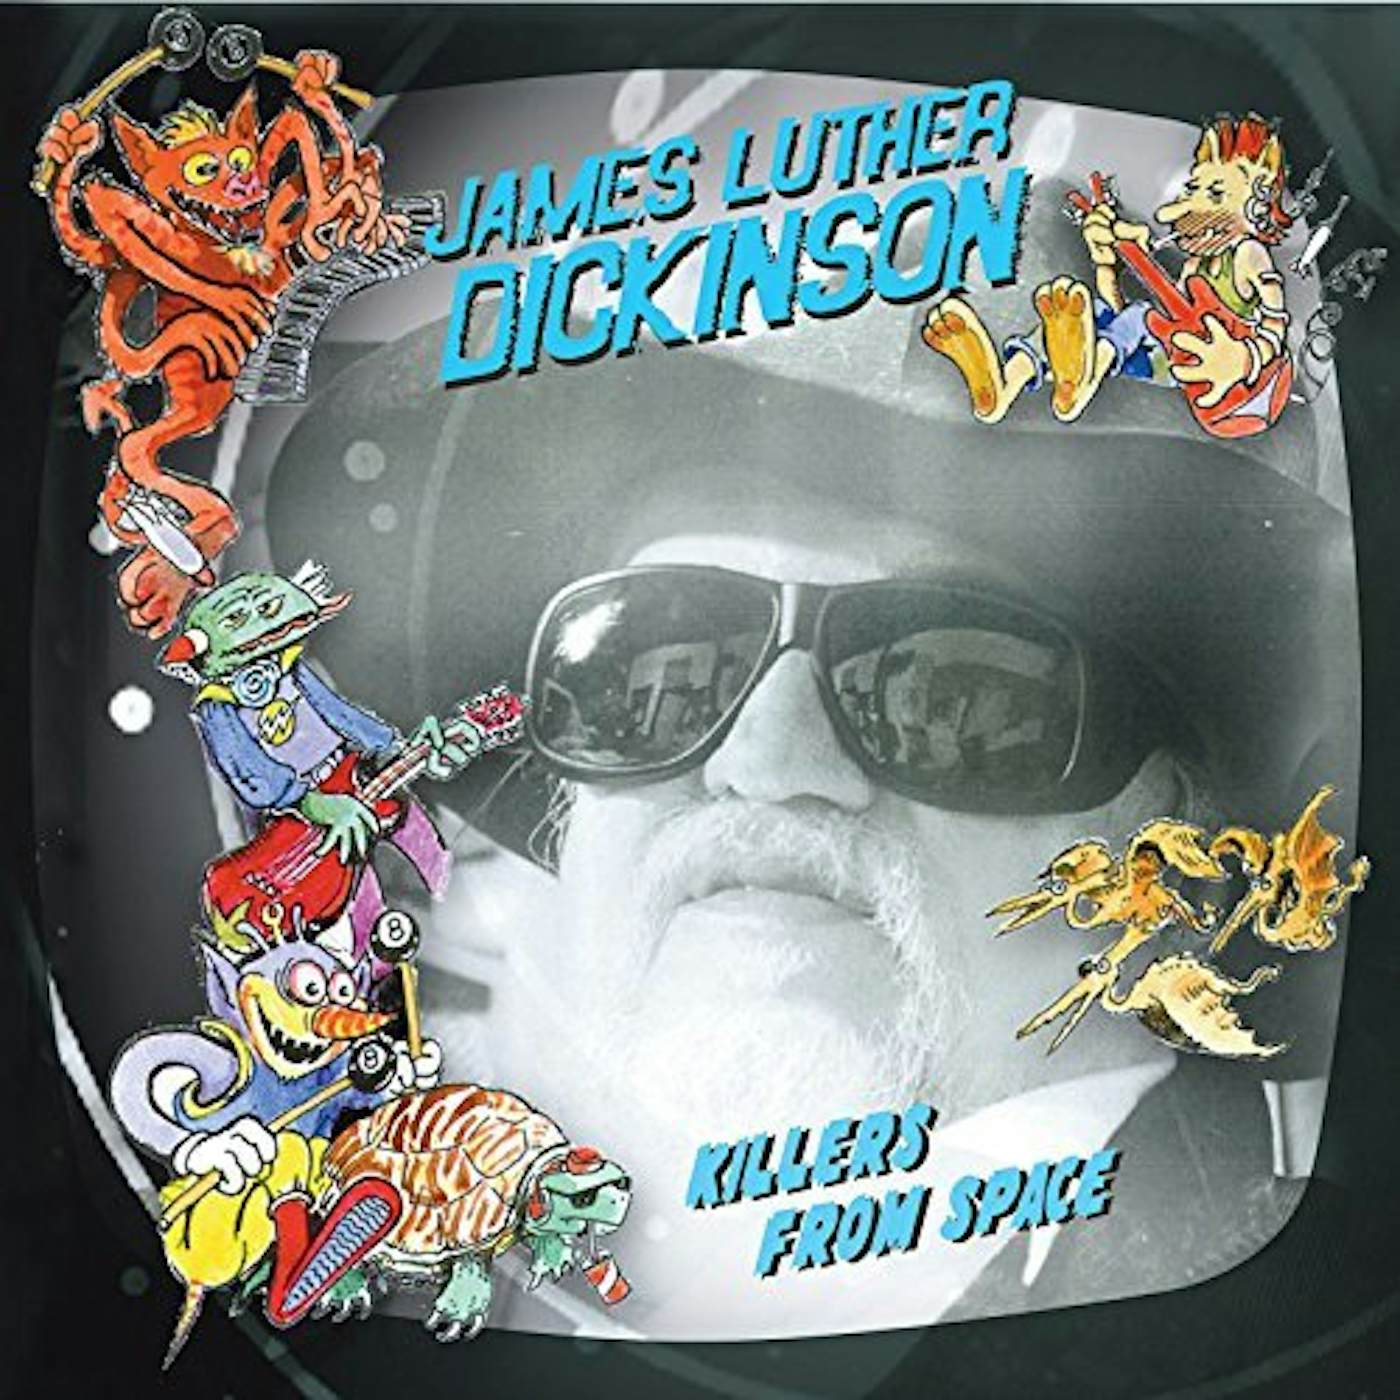 James Luther Dickinson KILLERS FROM SPACE CD